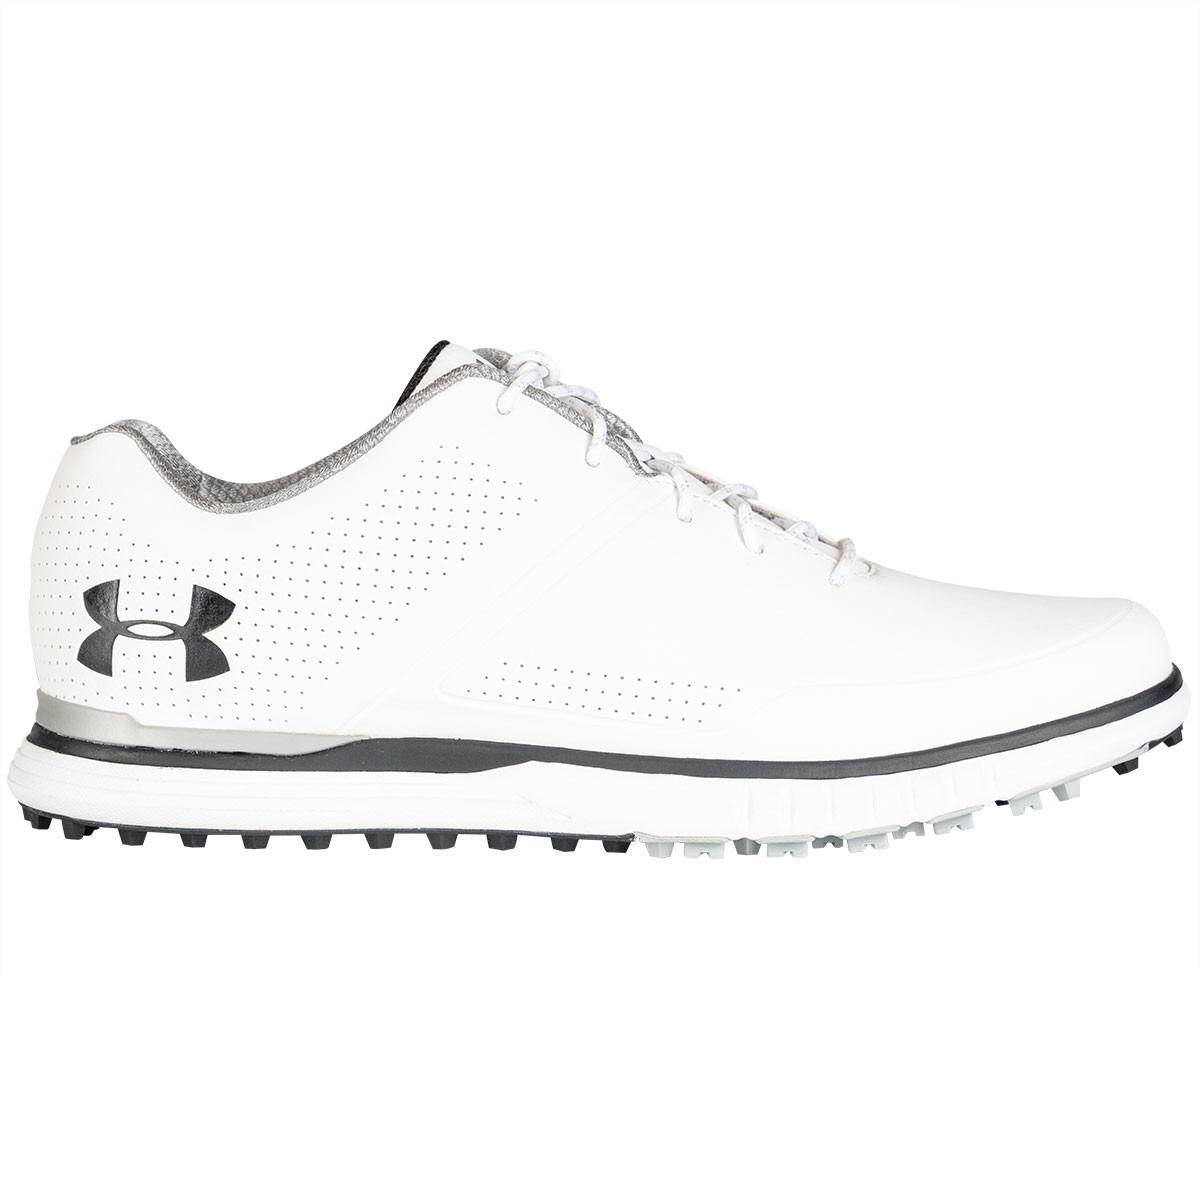 under armor golf shoes